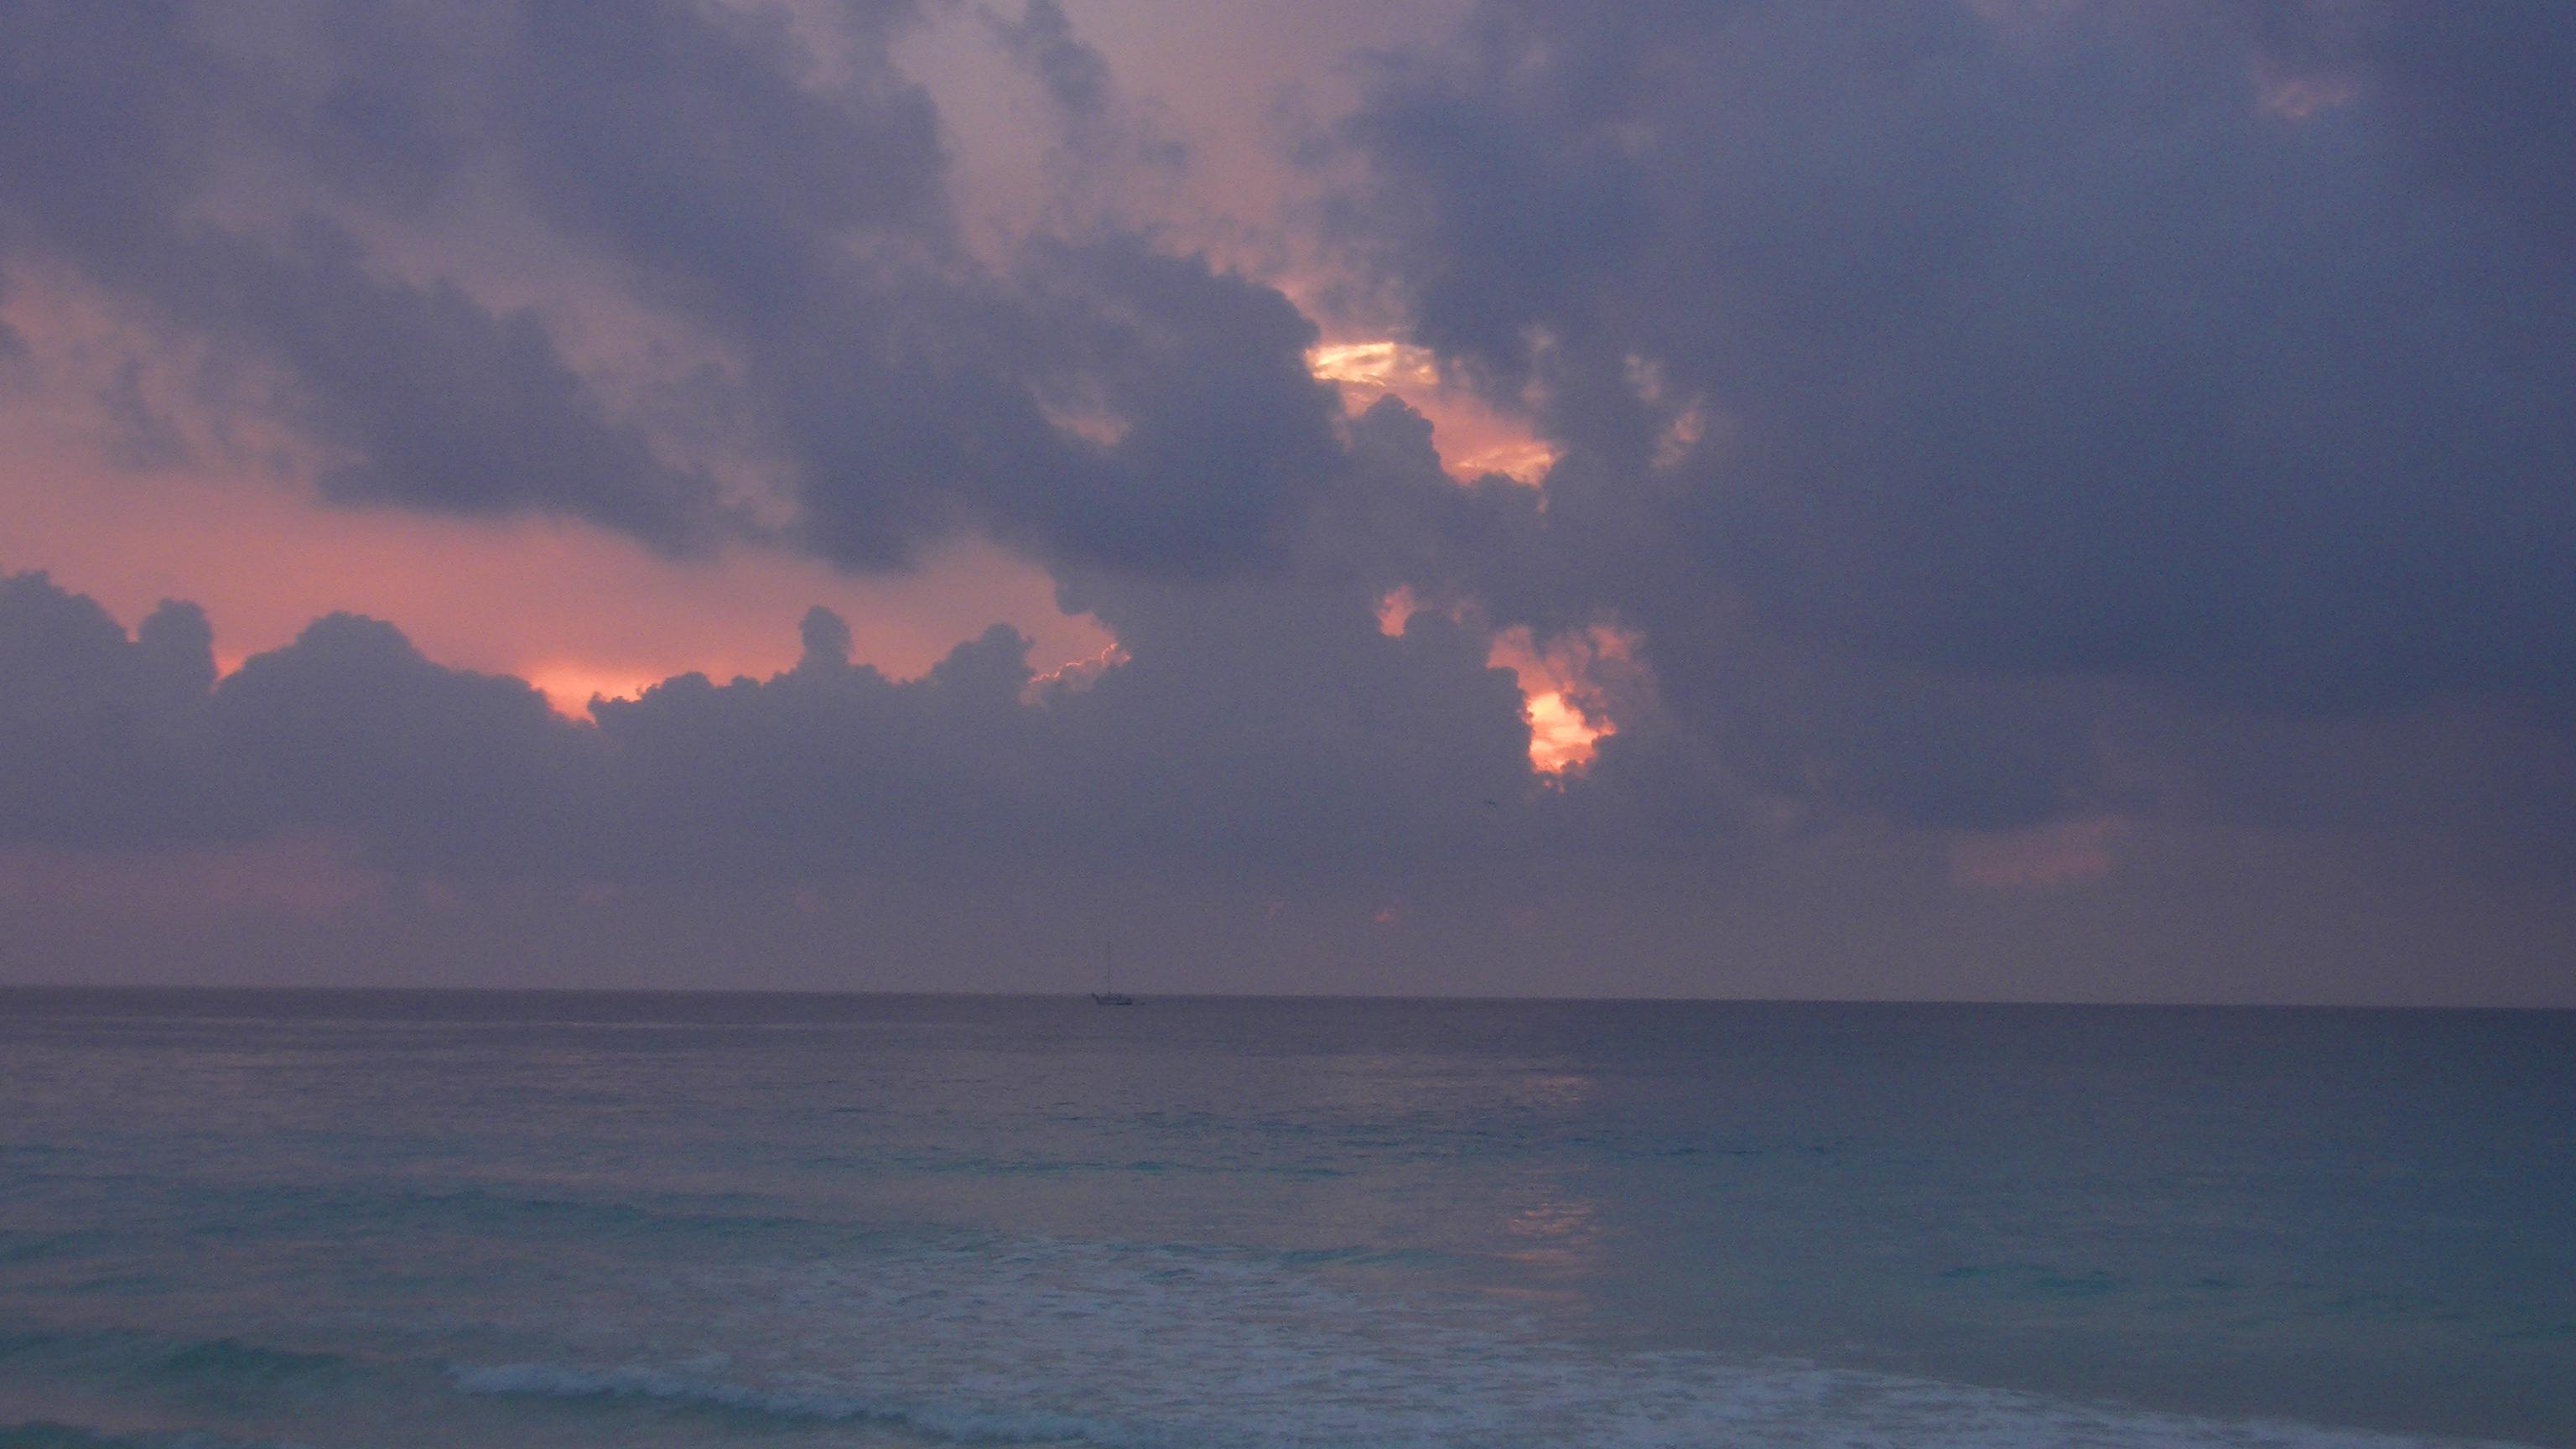 Cancun Sunrise High Quality And Resolution Wallpaper On